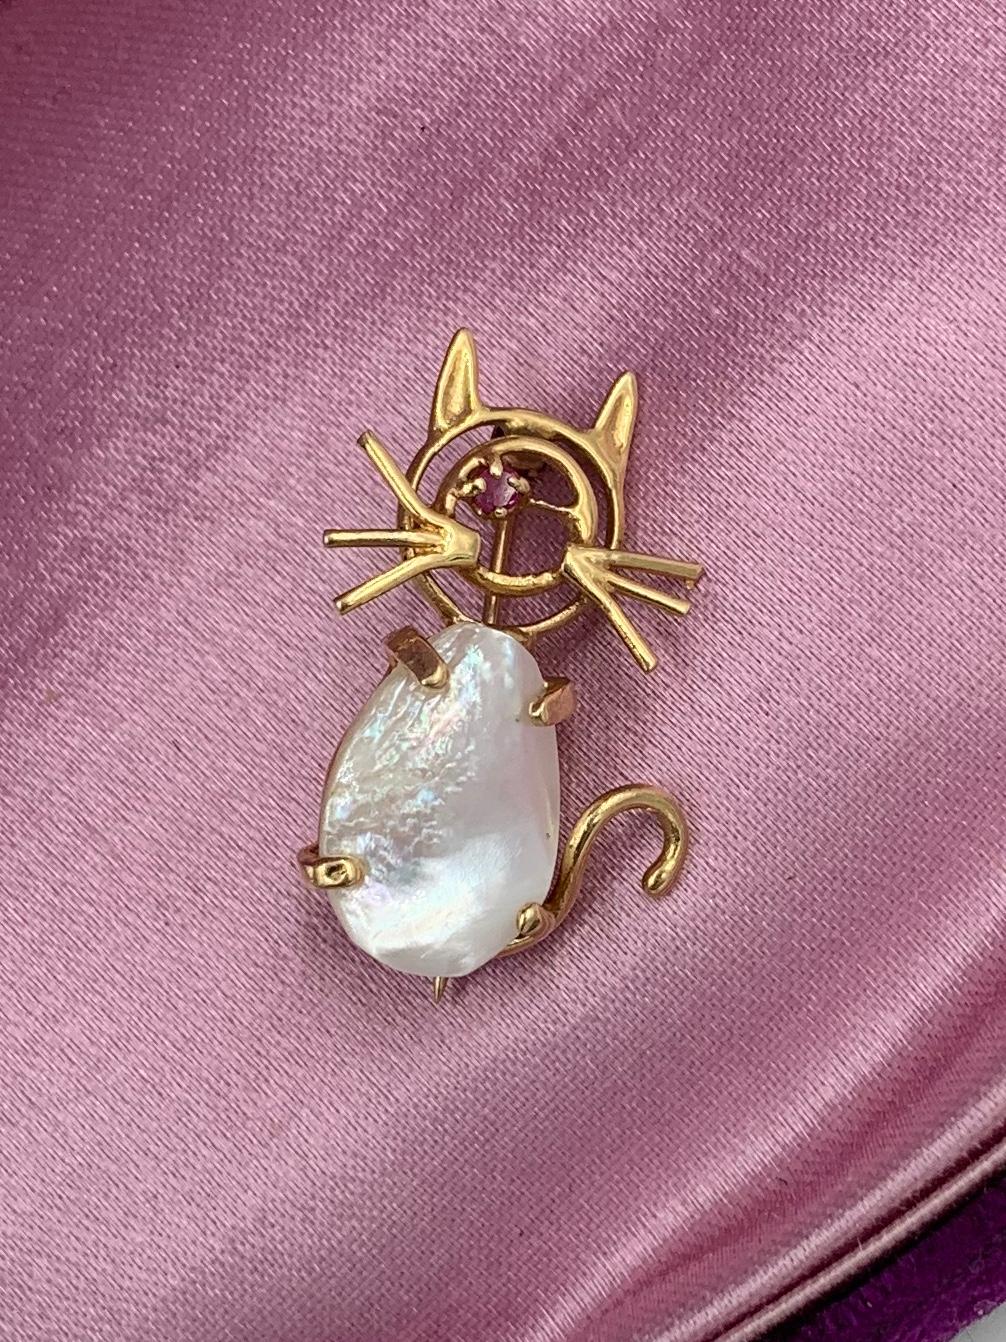 An adorable Cat or Kitten Retro Mid-Century Modern Brooch Pin with a Pearl body and Ruby eye in 10 Karat Gold.  The cat has great Mid-Century Modernist style and design!  The adorable cat has a wonderful open work face and whiskers.  The eye is a